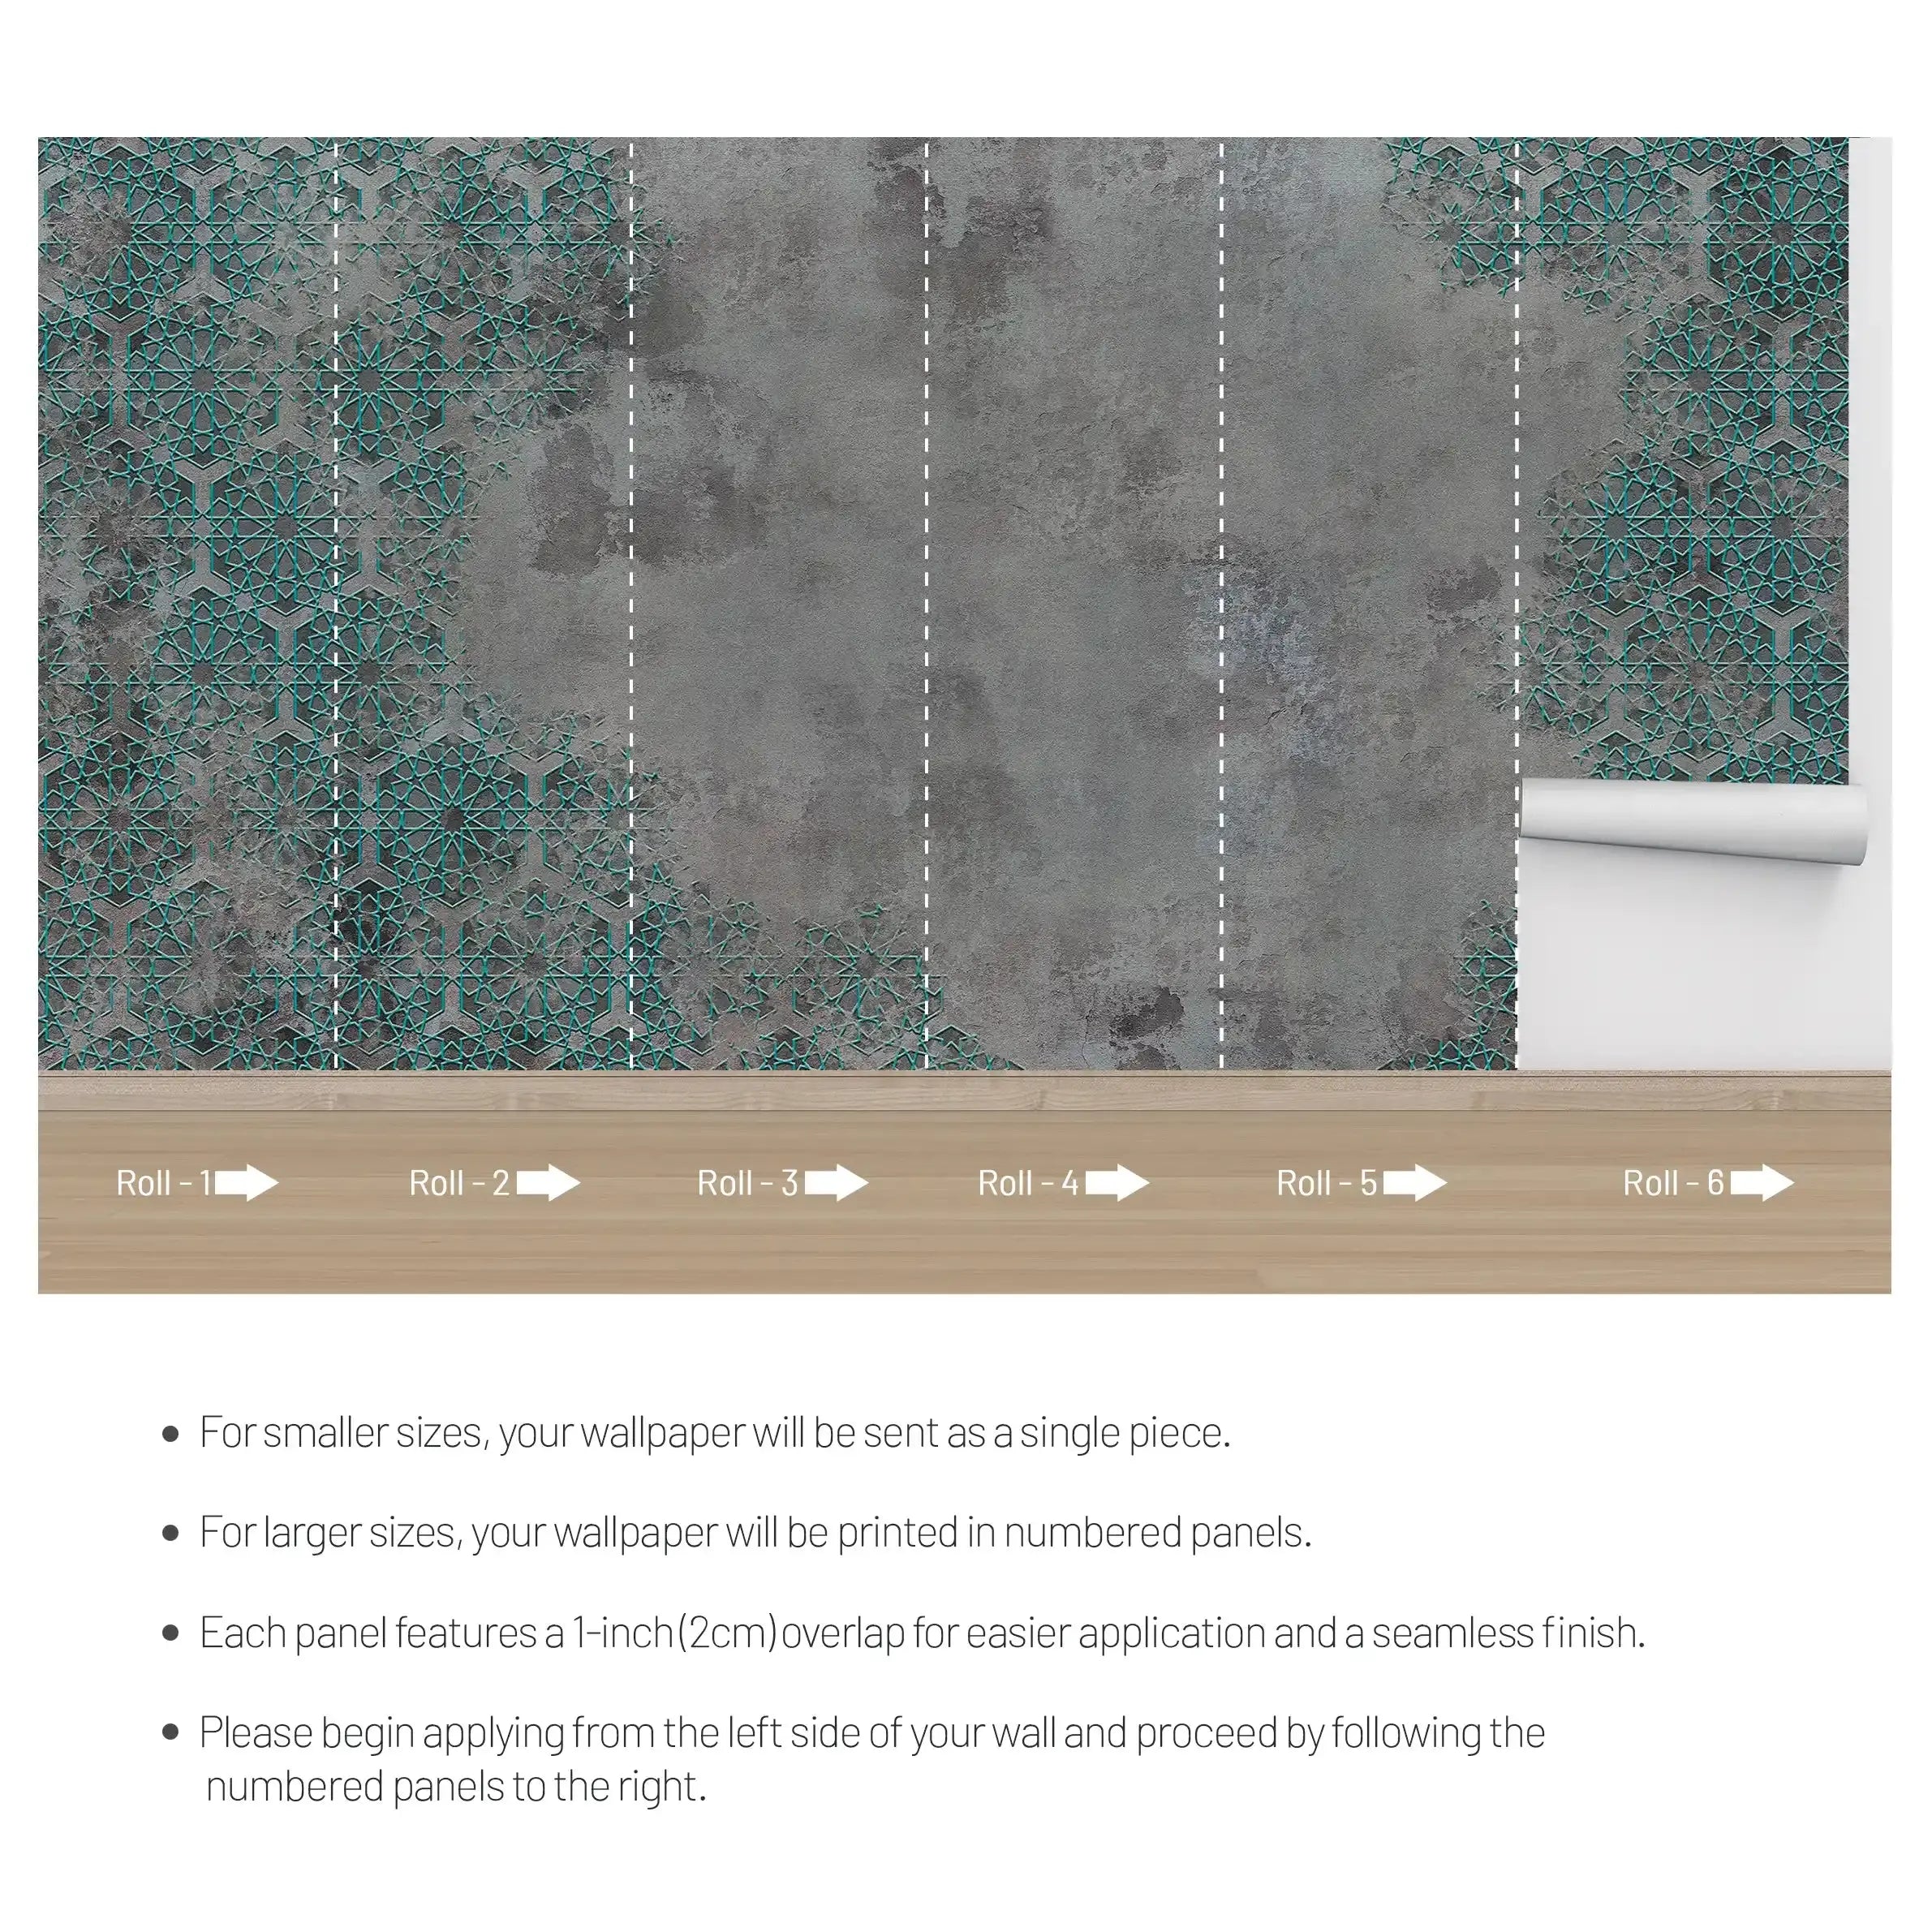 3068-B / Elegant Floral Abstract Peel and Stick Wallpaper with Turquoise Border - Perfect for Modern Room Deco - Artevella